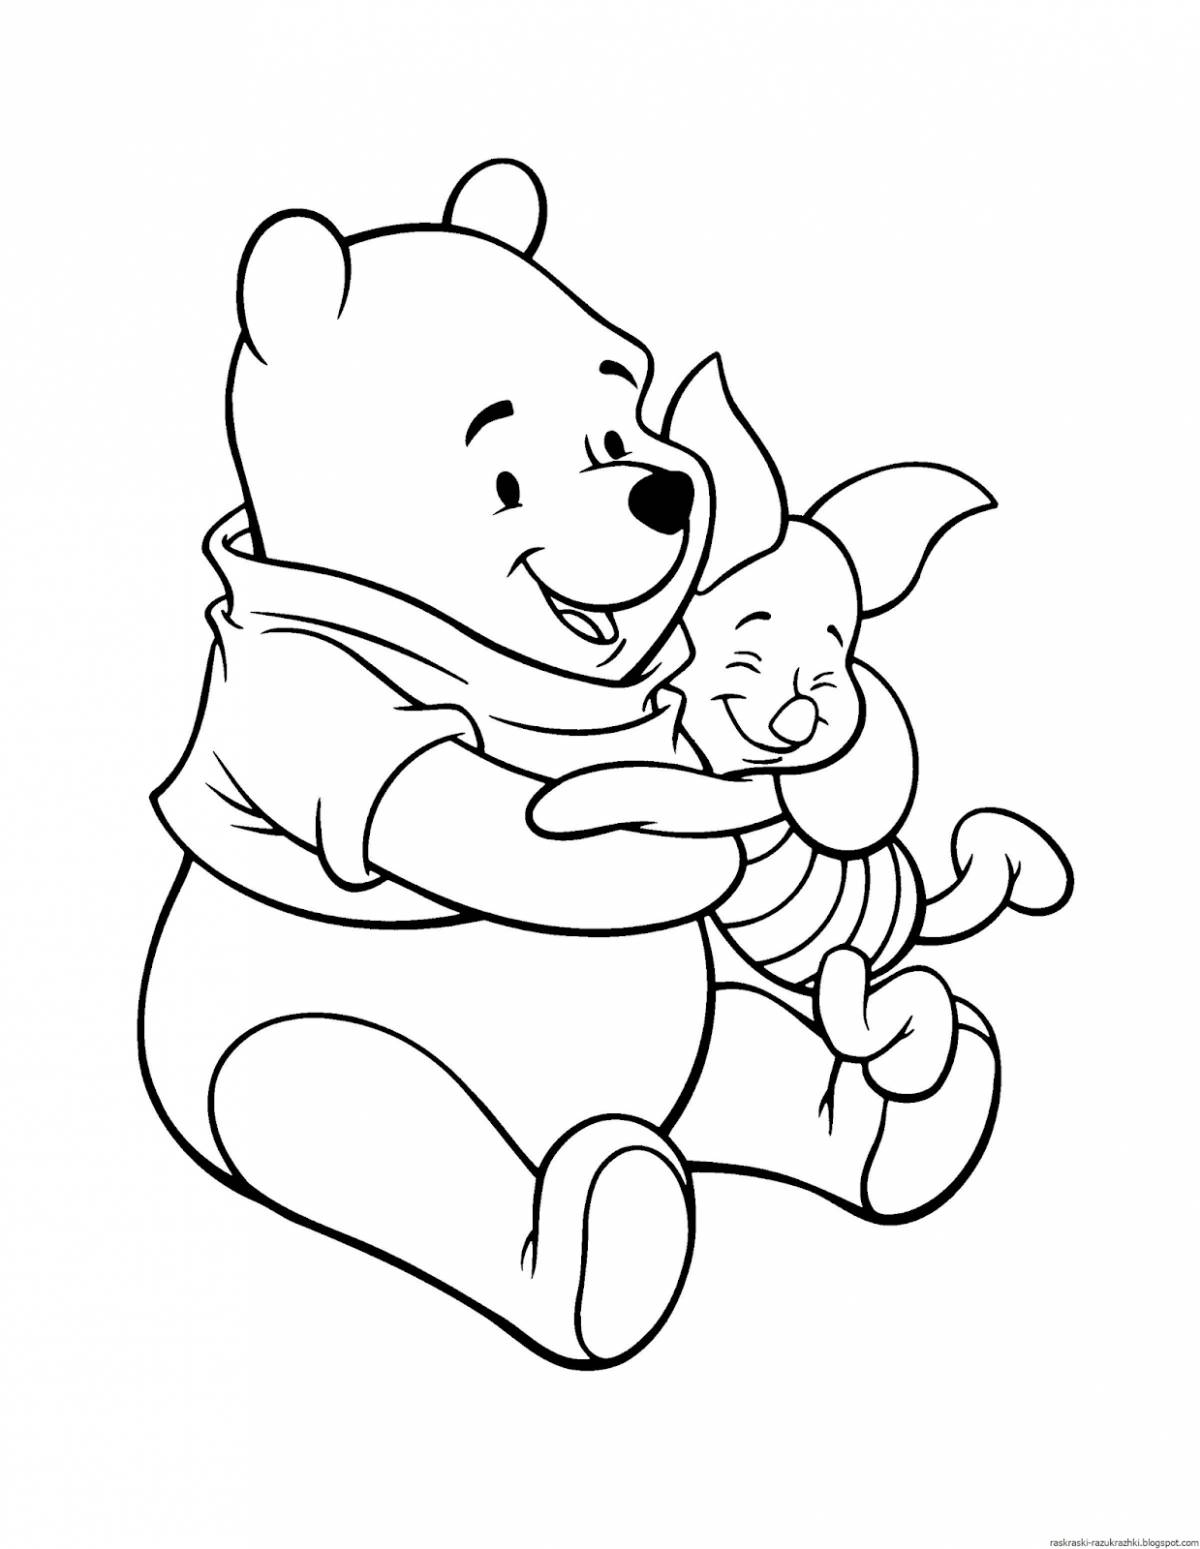 Winnie the pooh live coloring